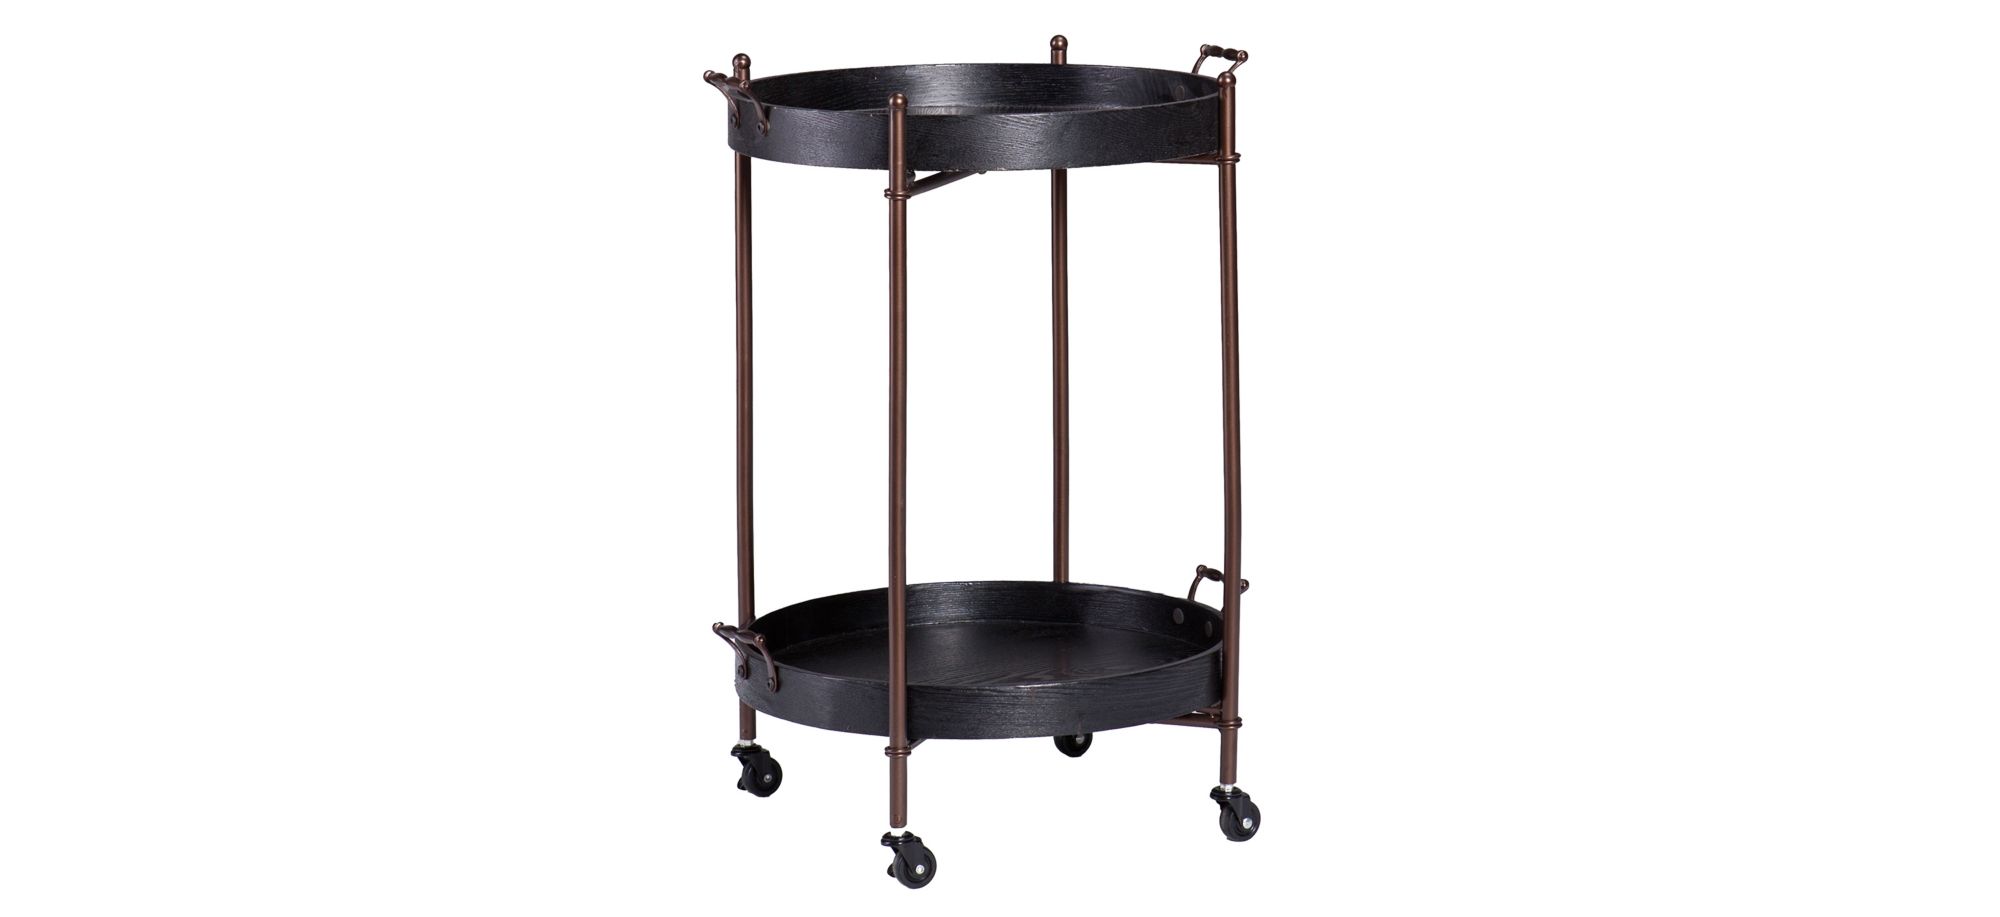 Pinkerton Two-Tier Round Butler Table in Black by SEI Furniture